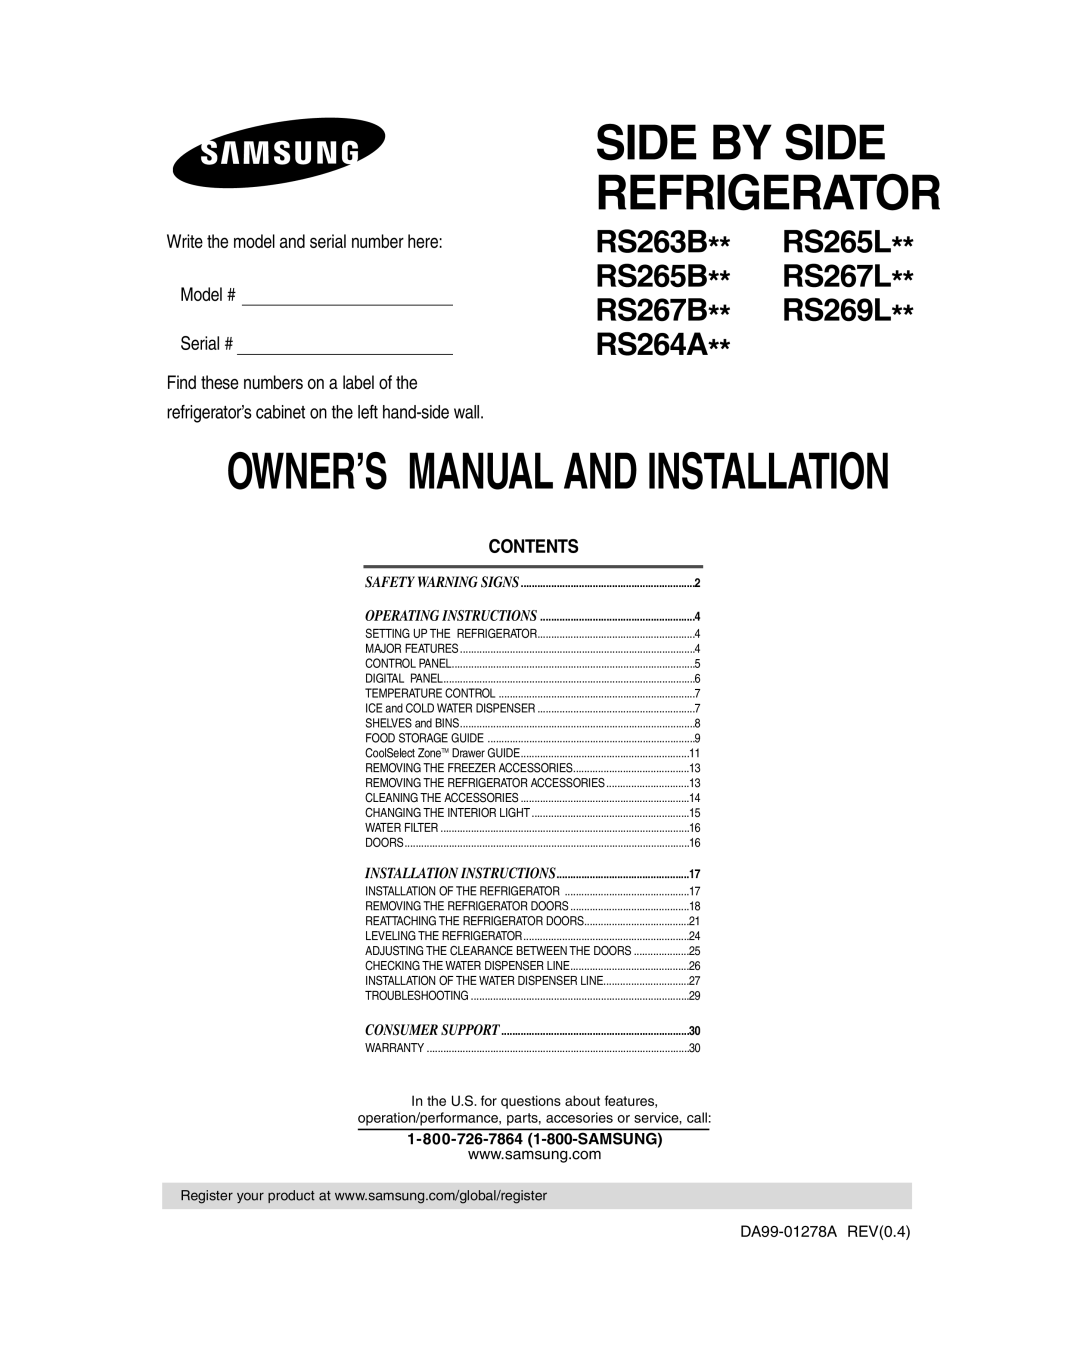 Samsung RS267LBSH owner manual Write the model and serial number here Model #, Serial #, Contents 